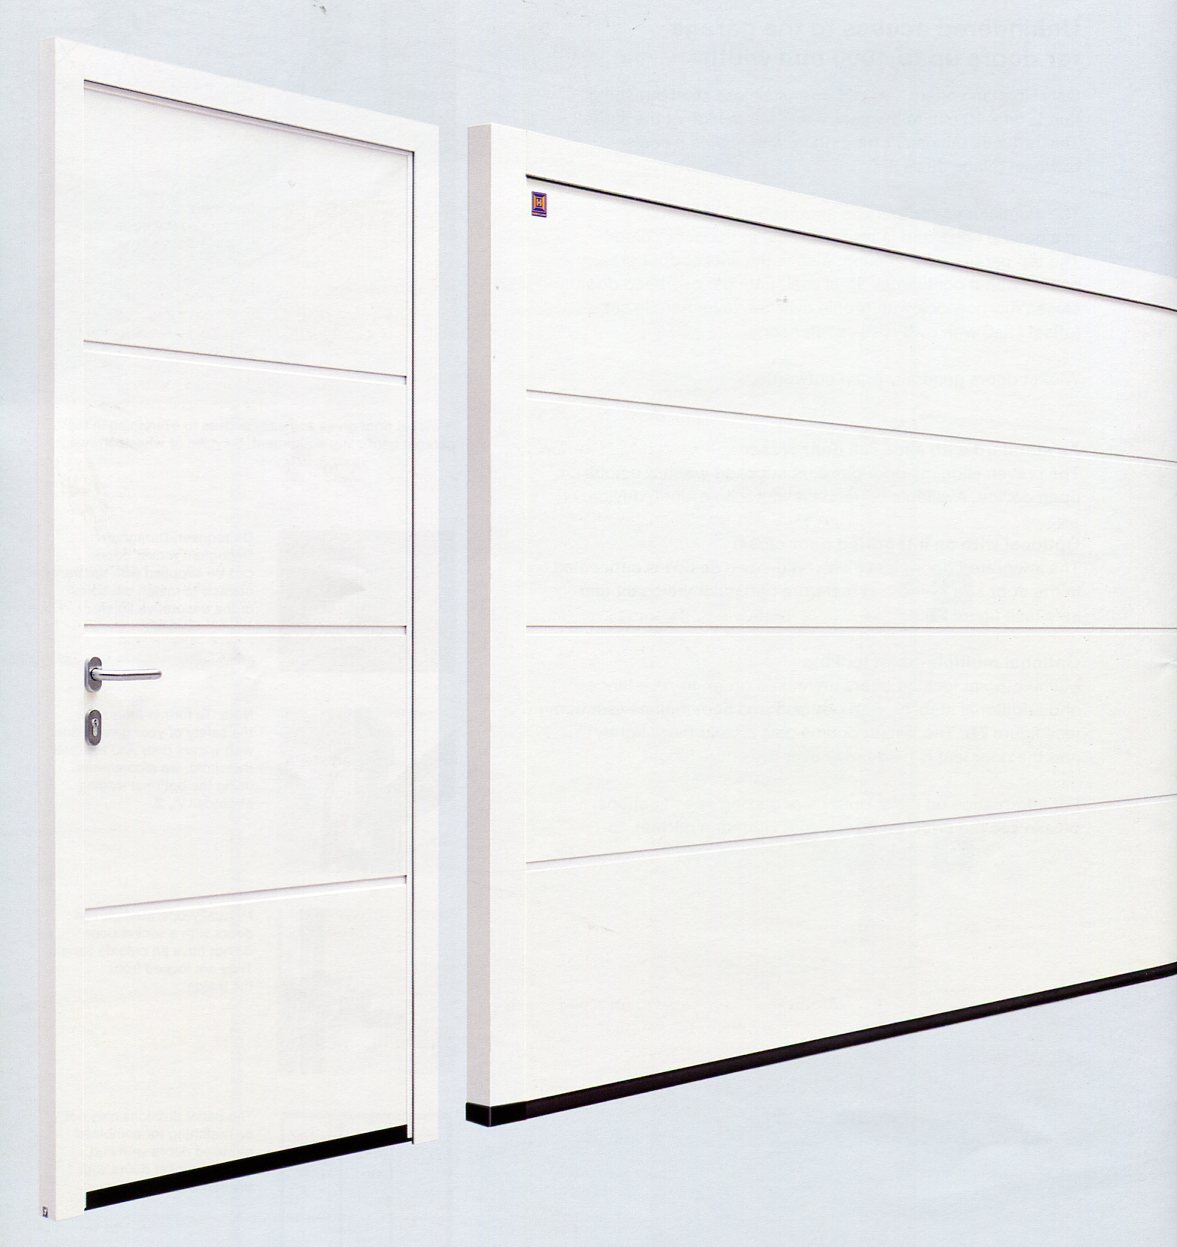 Picture of Hormann L-Rib sectional garage door with matching side door